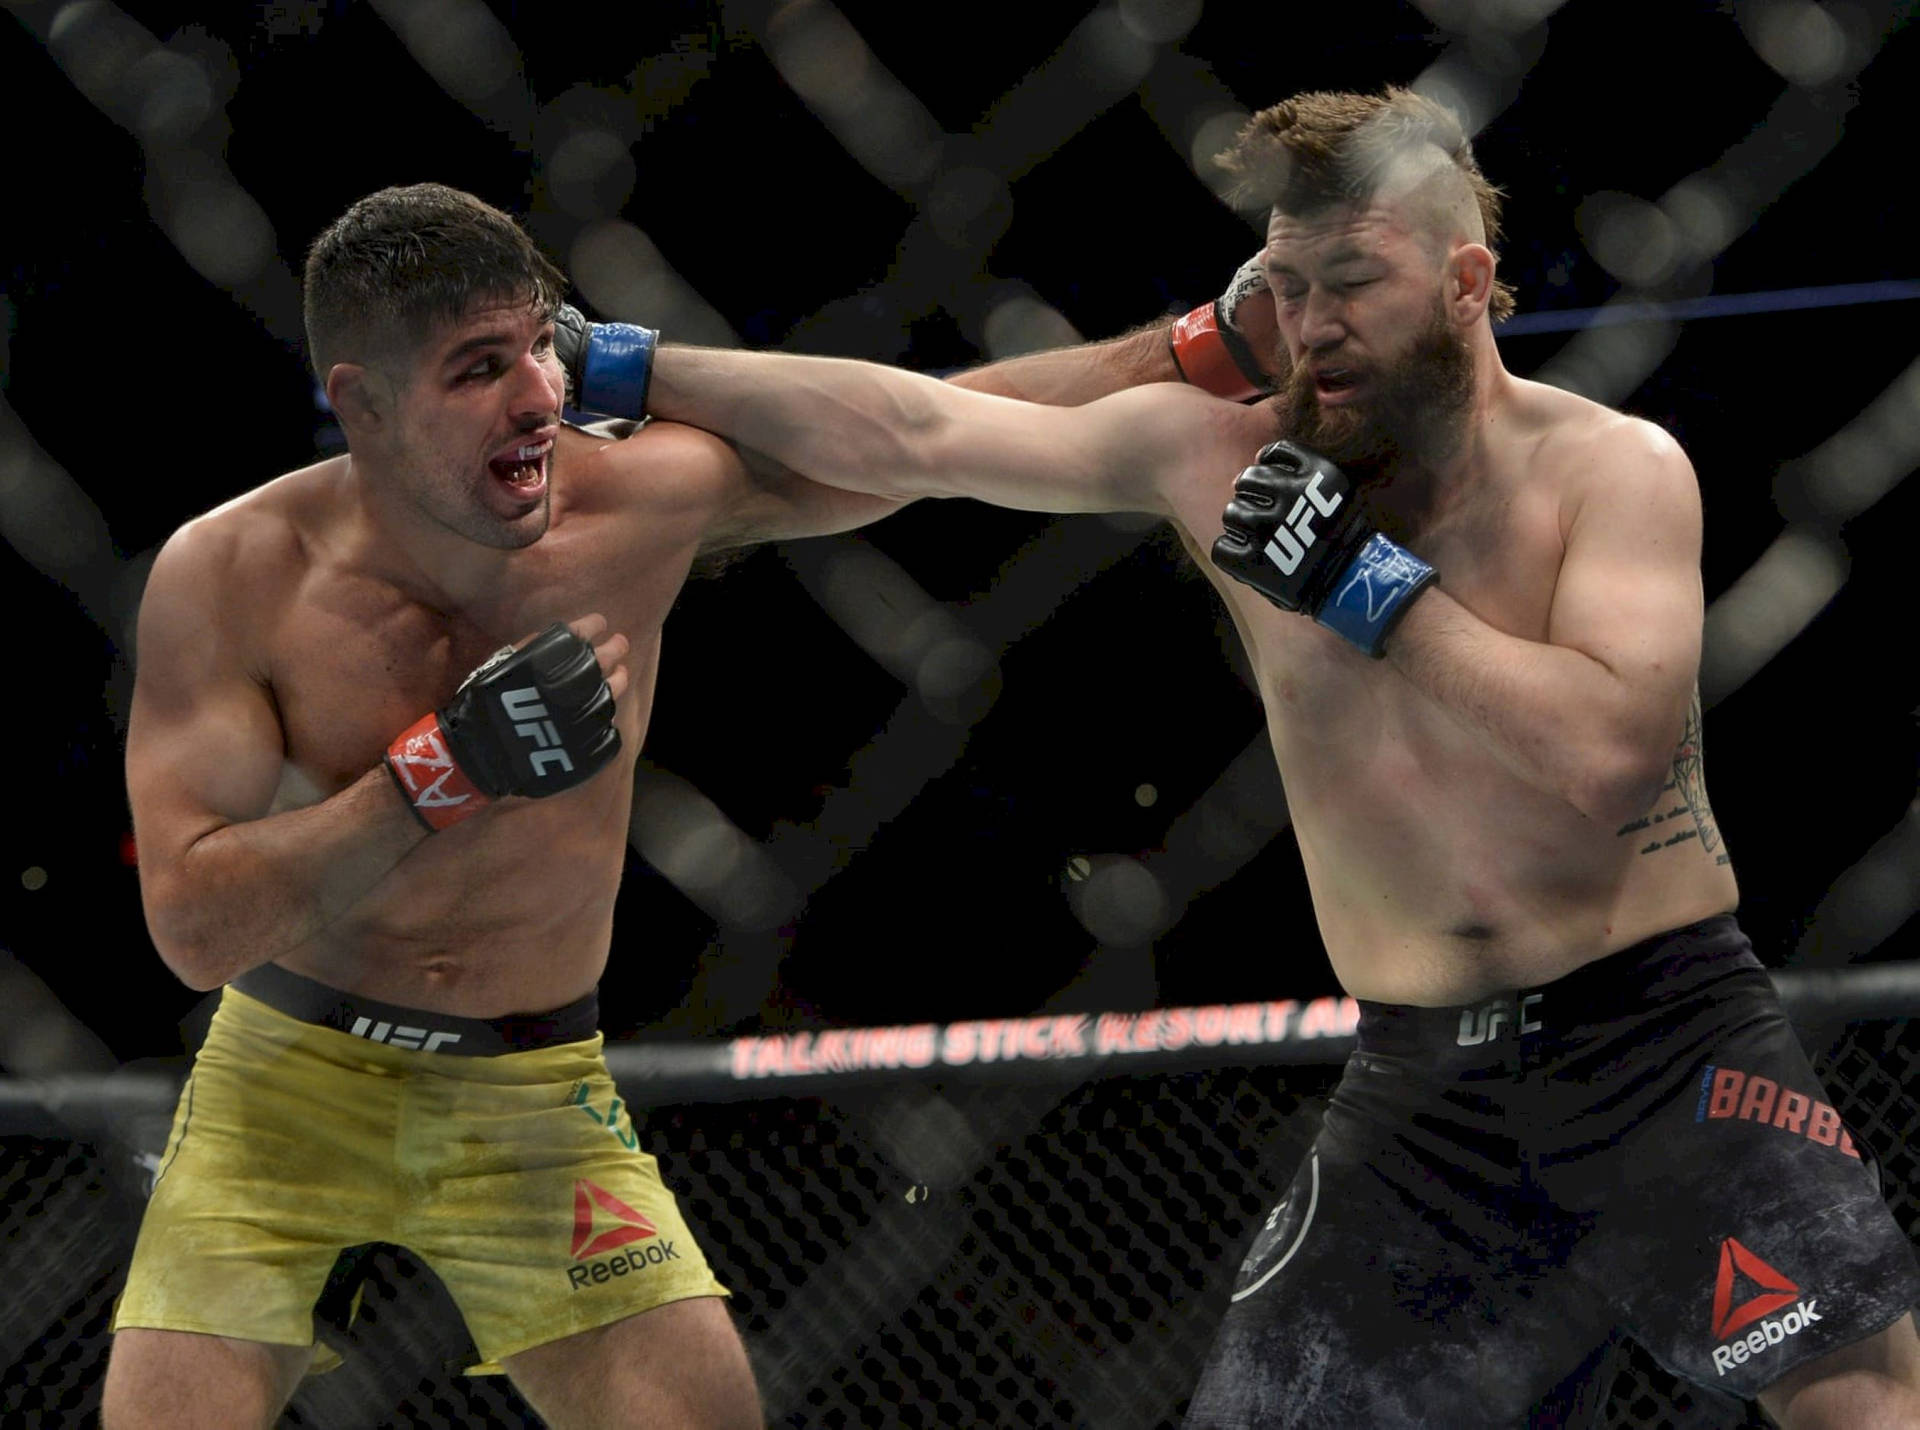 Vicente Luque fiercely battling it out inside the Octagon Wallpaper